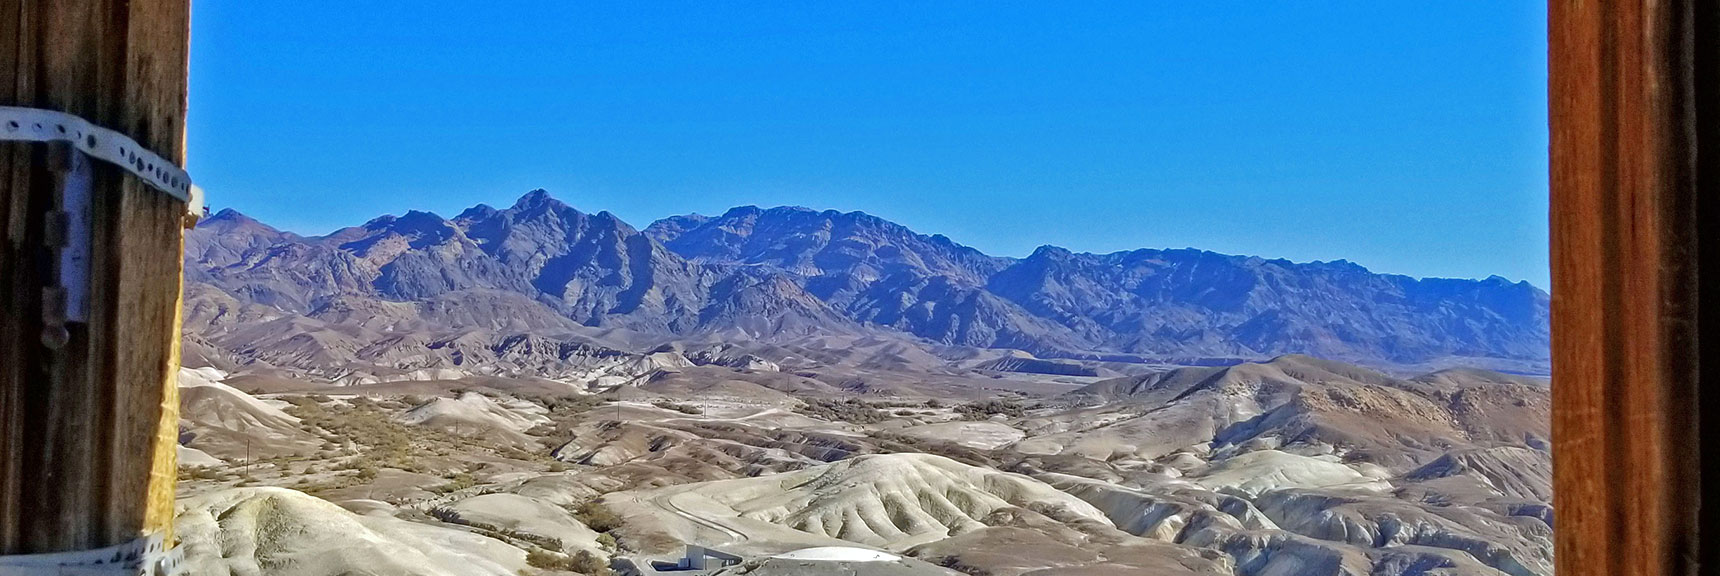 Funeral Mountains to the East Viewed from Within the Tea House | Tea House & Table Rock Circuit | Furnace Creek | Death Valley National Park, California